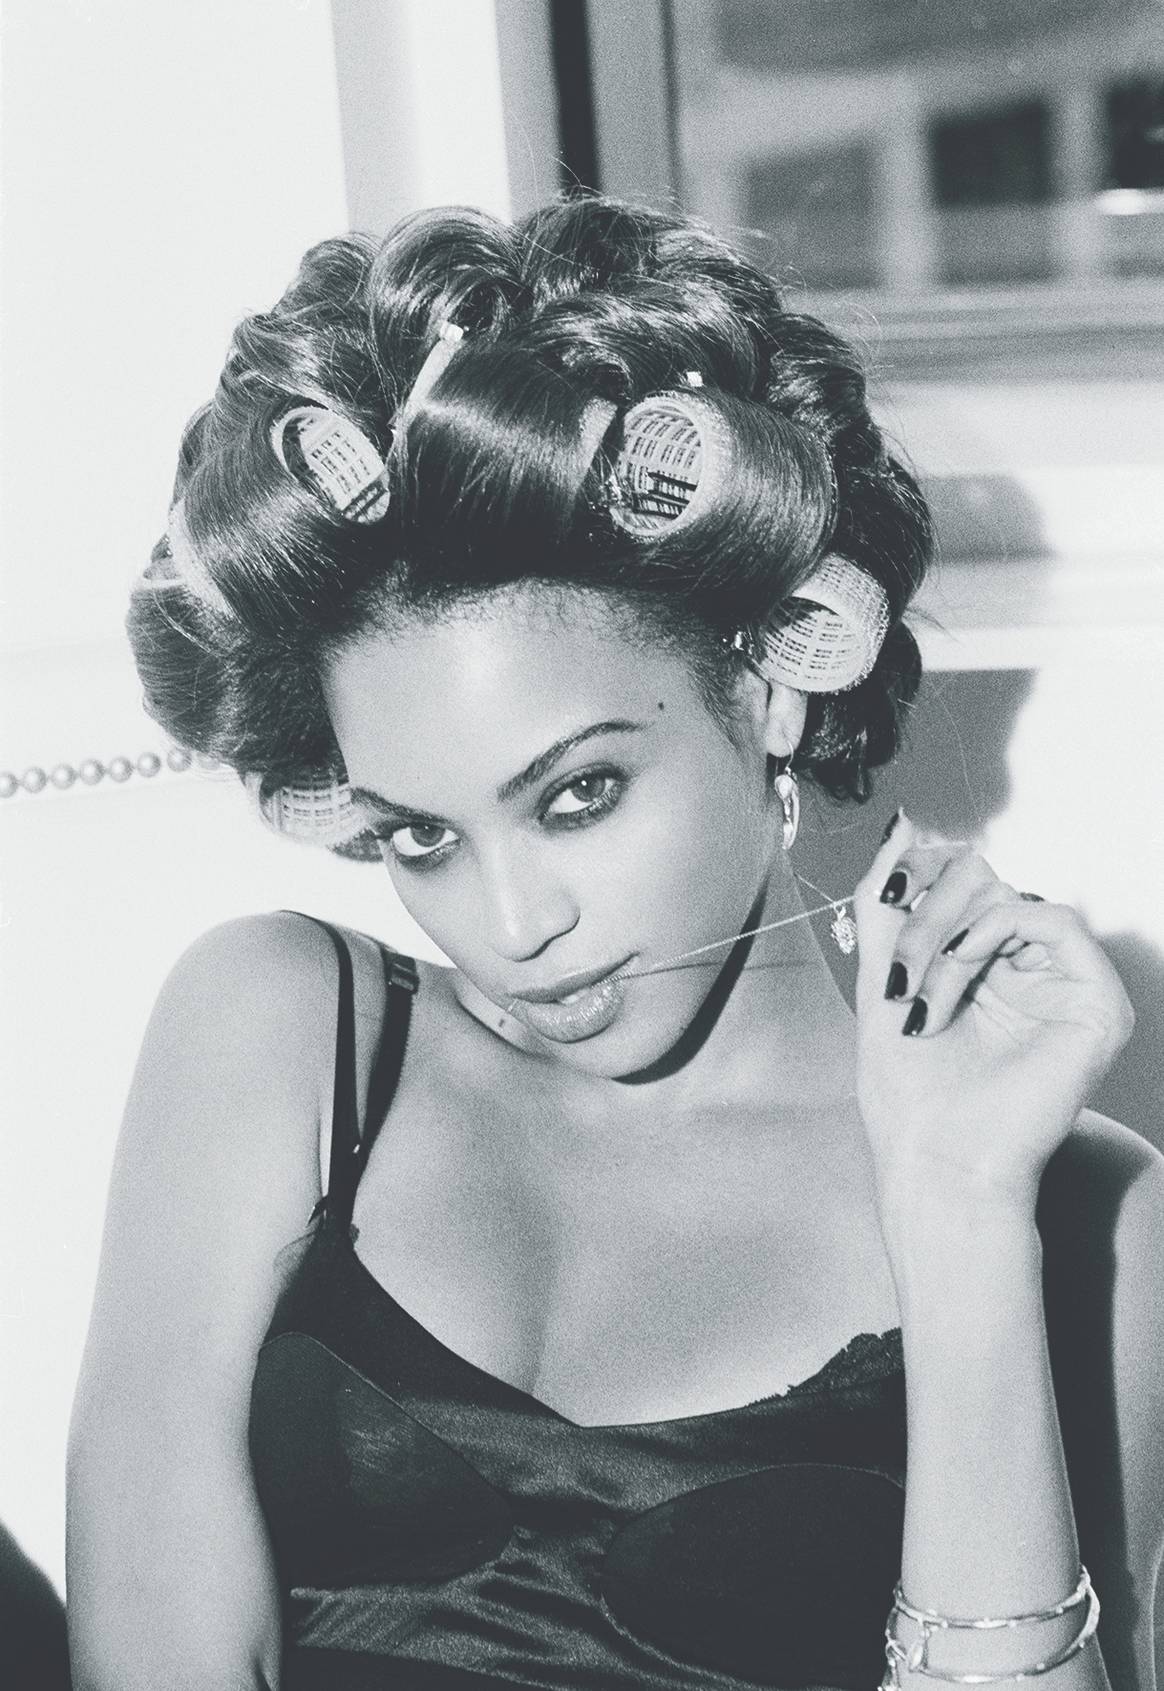 Beyonce, Lady Gaga, Britney Spears, Janet Jackson are just some of the celebrites photographed by Ellen von Unwerth